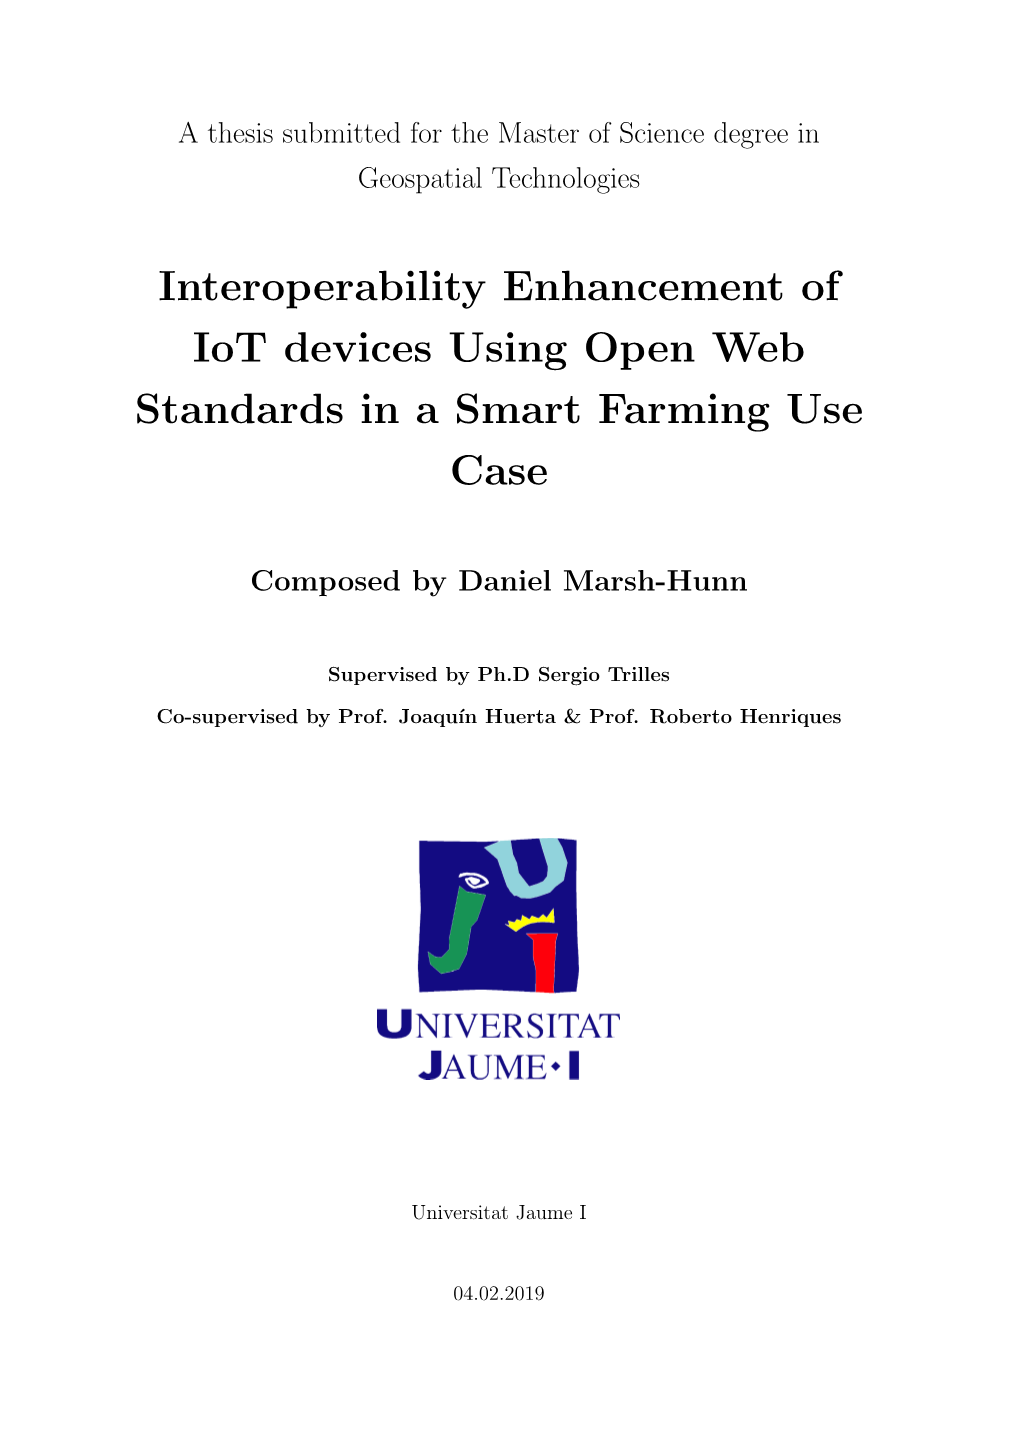 Interoperability Enhancement of Iot Devices Using Open Web Standards in a Smart Farming Use Case